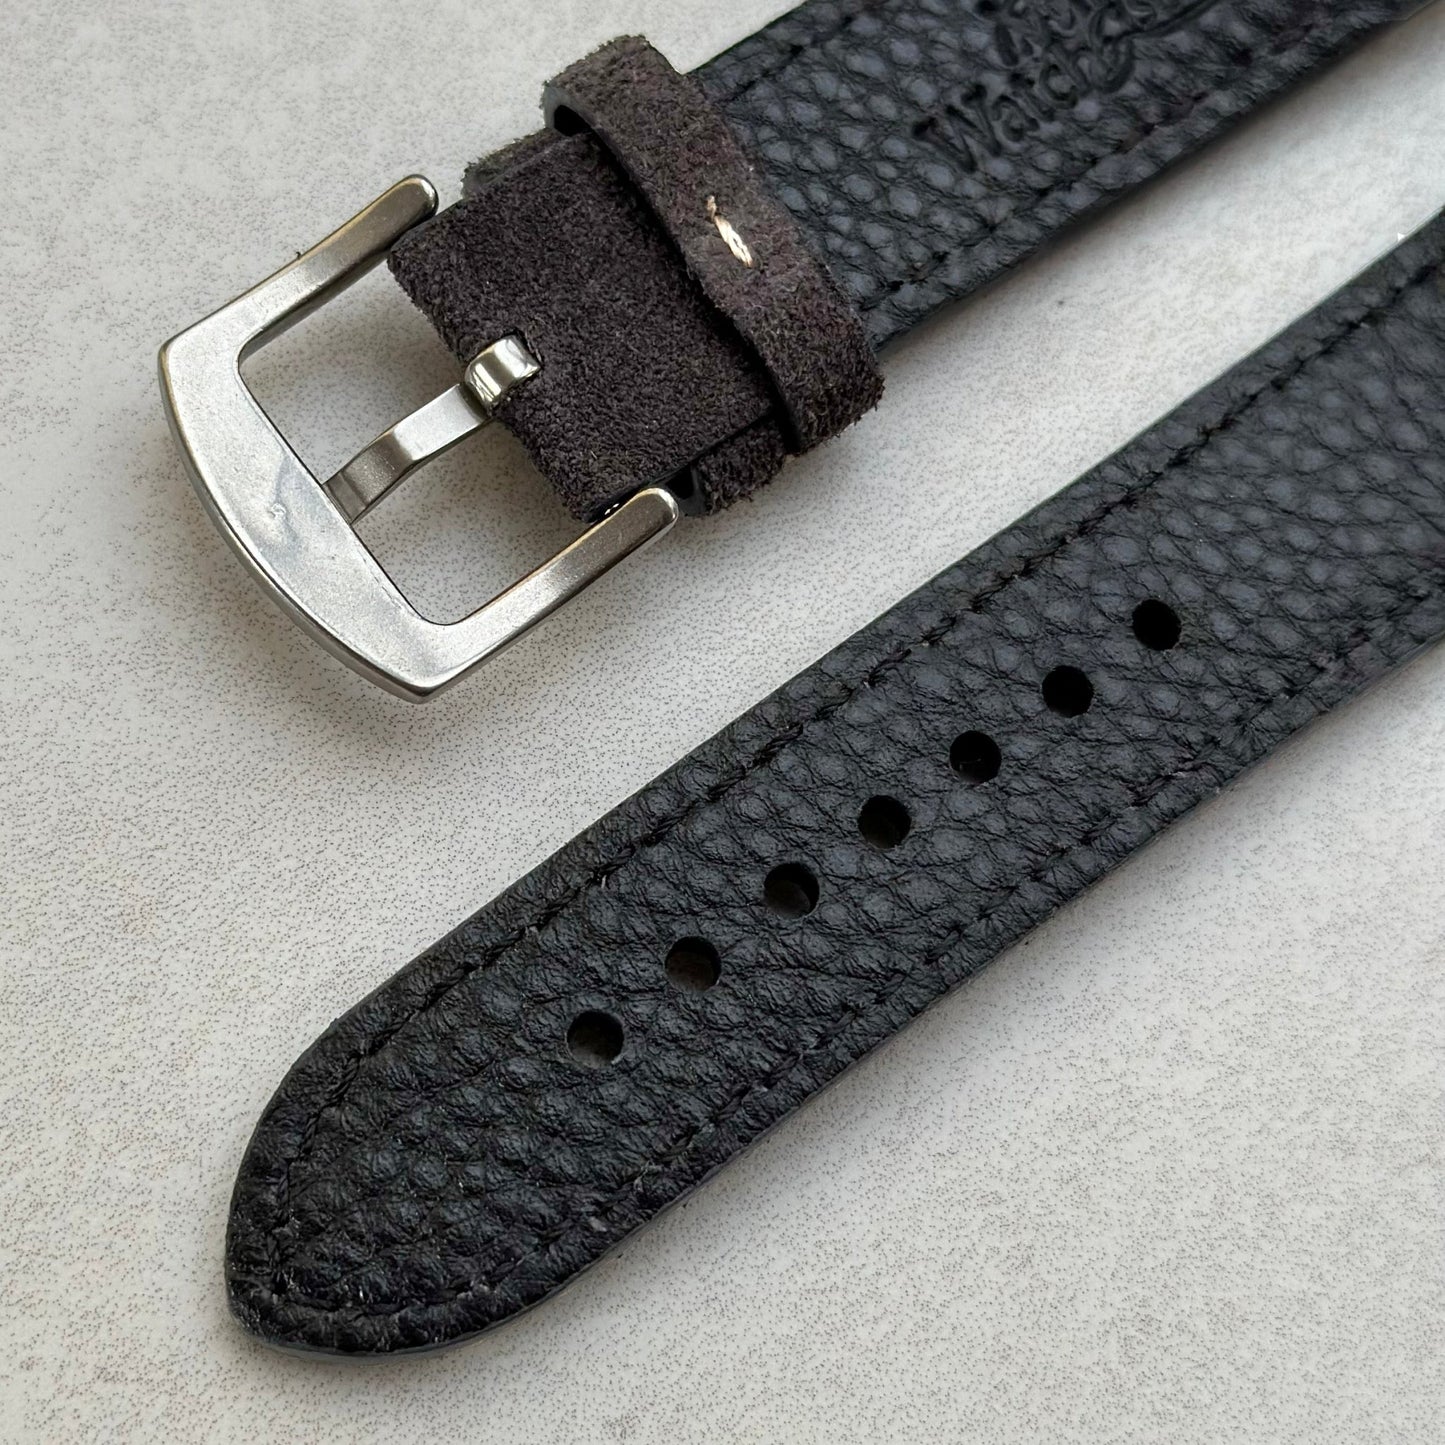 Brushed 316L stainless steel buckle on the Paris gunmetal grey suede watch strap. Watch And Strap.